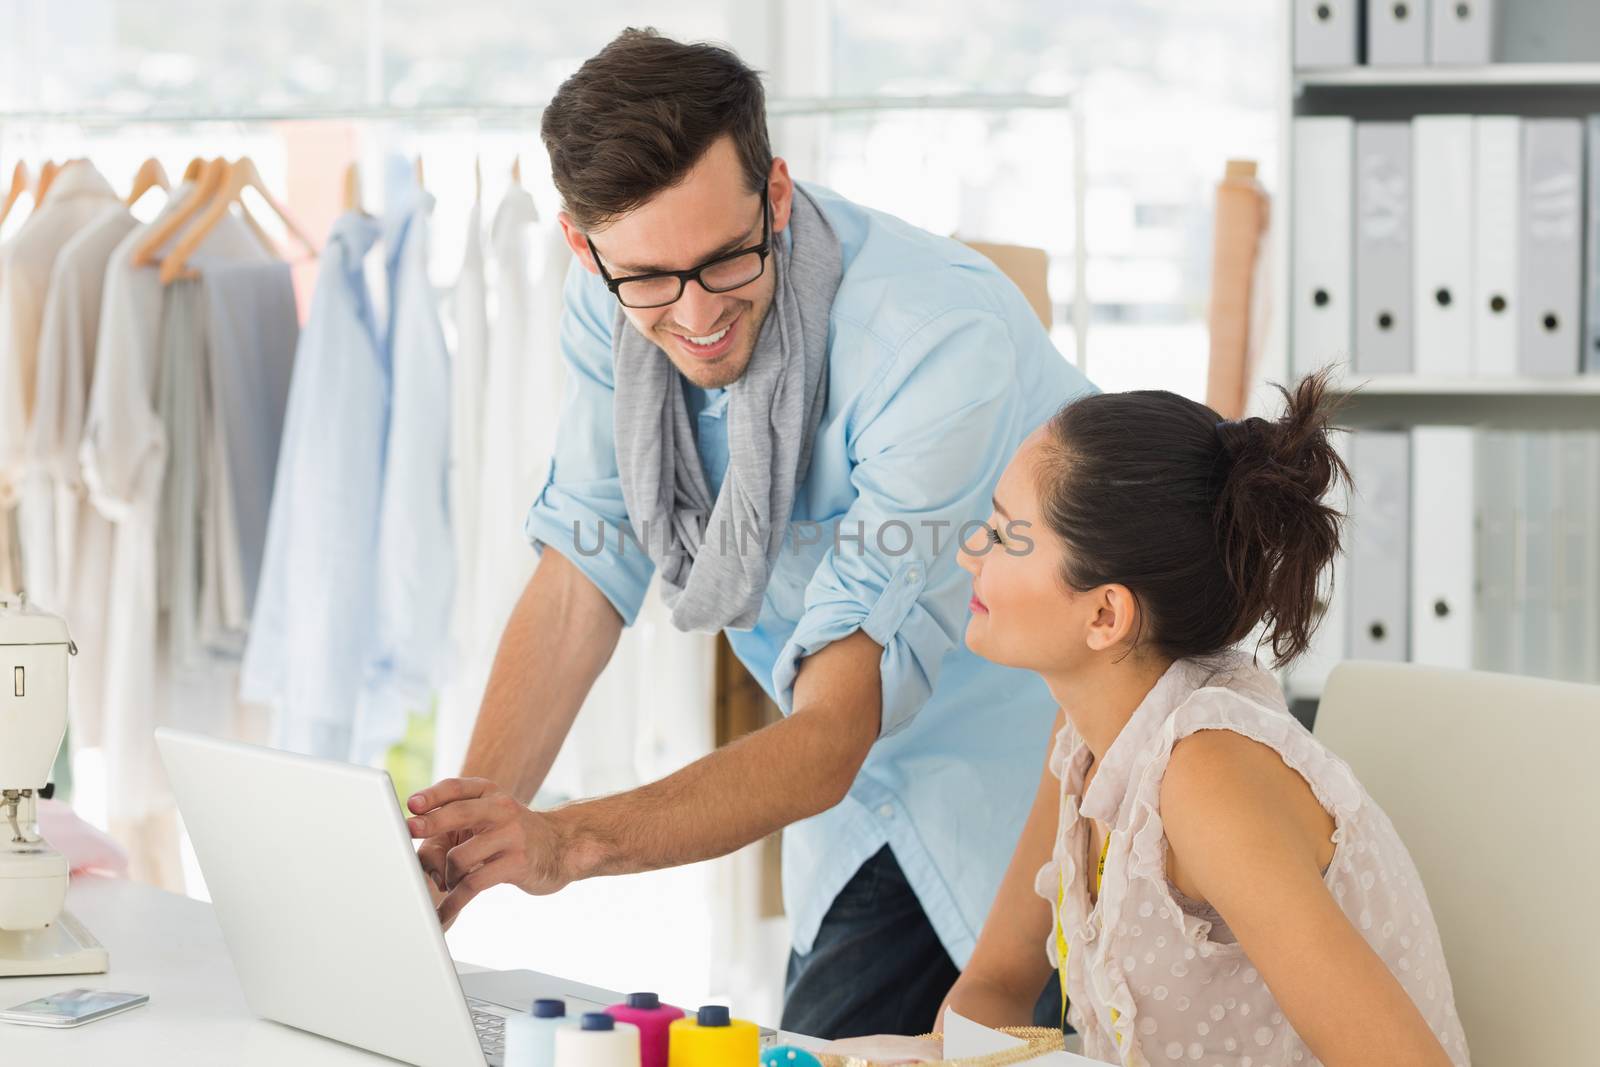 Male and female fashion designers using laptop at work in a studio